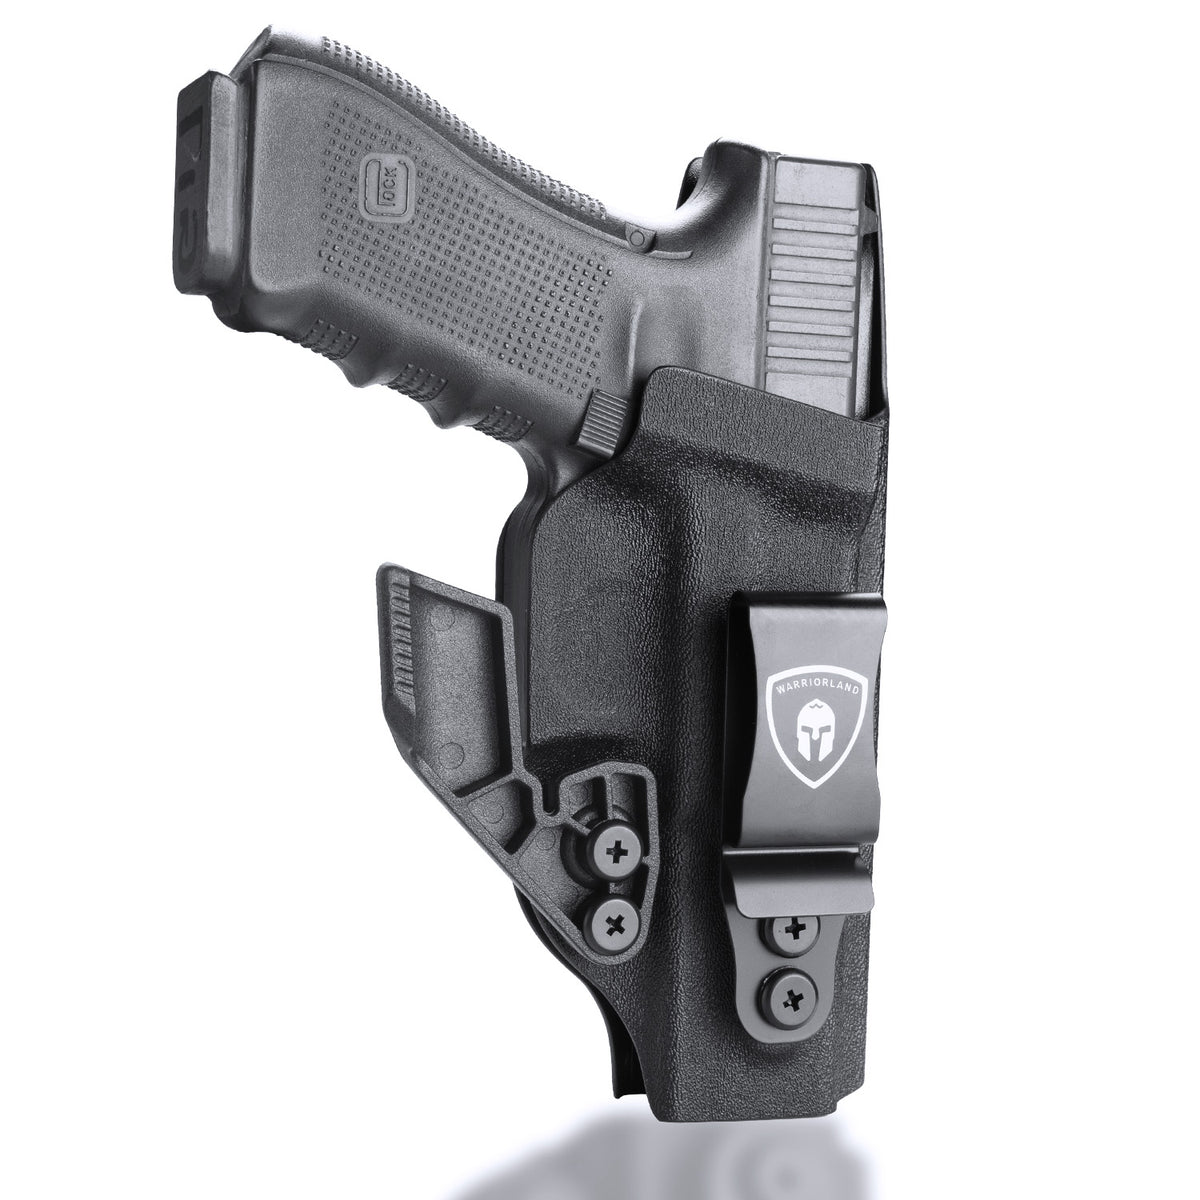 Glock 17 IWB Kydex Holster with Claw, Metal Belt Clip - Optic Ready, 0.06 inch Kydex | Right/Left Hand